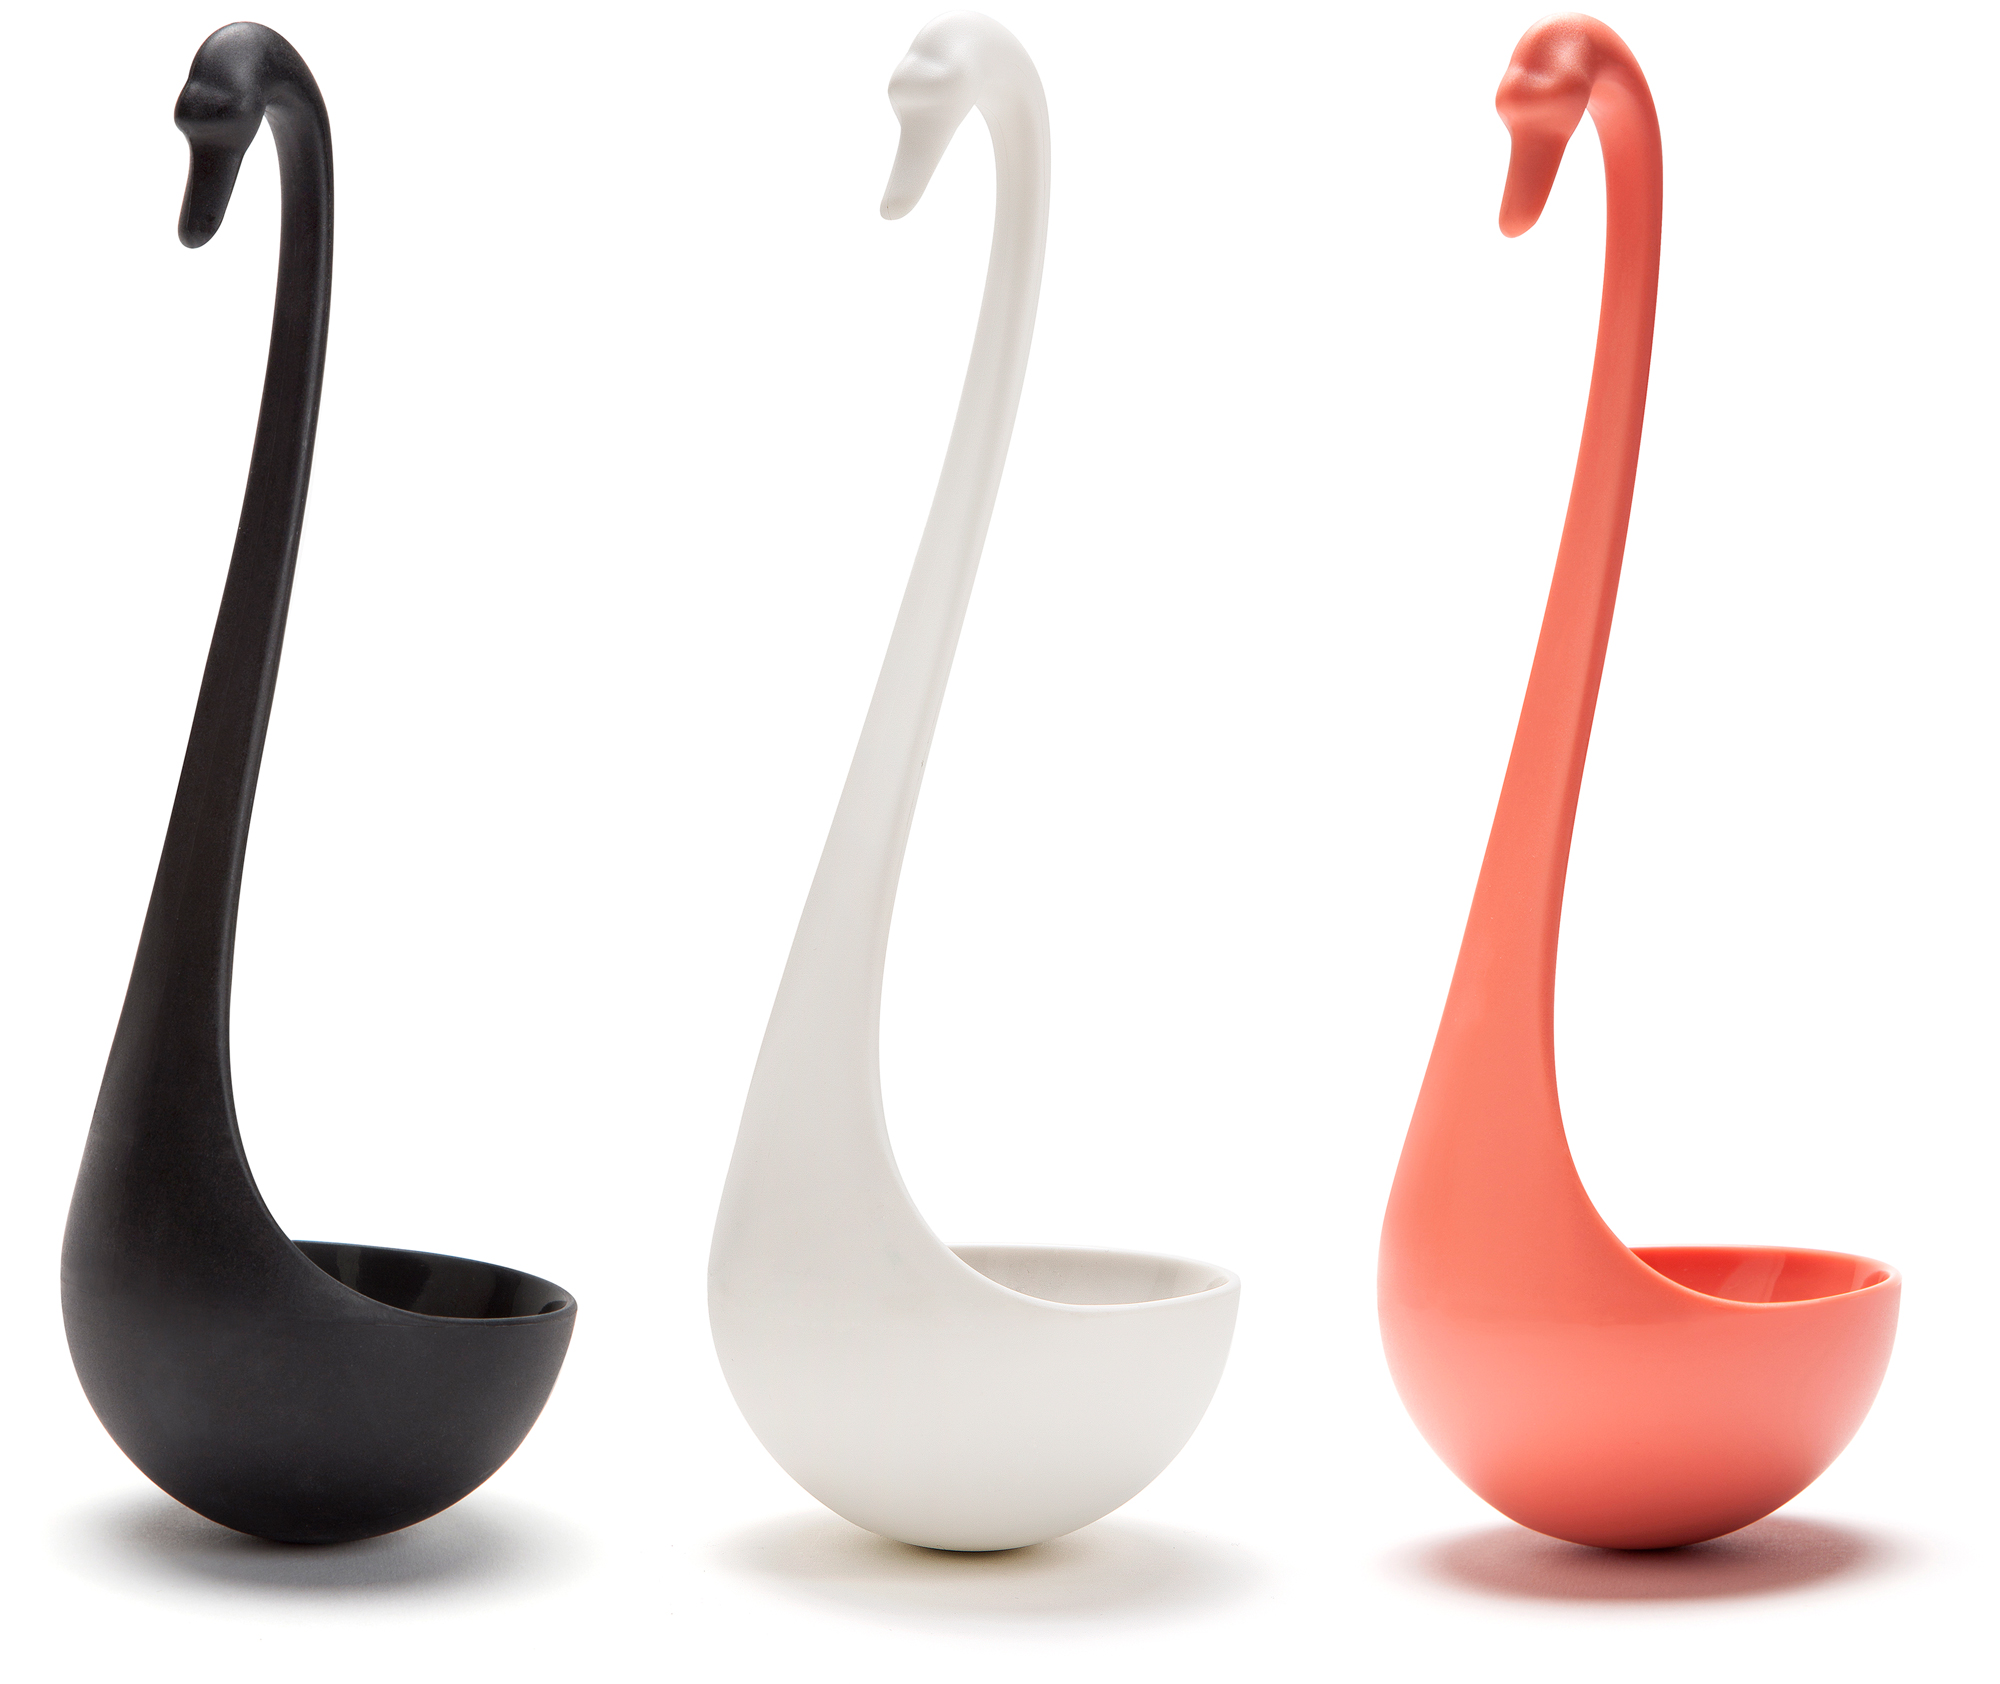 This Swan-Shaped Floating Ladle Won’t Sink To The Bottom Of A Pot